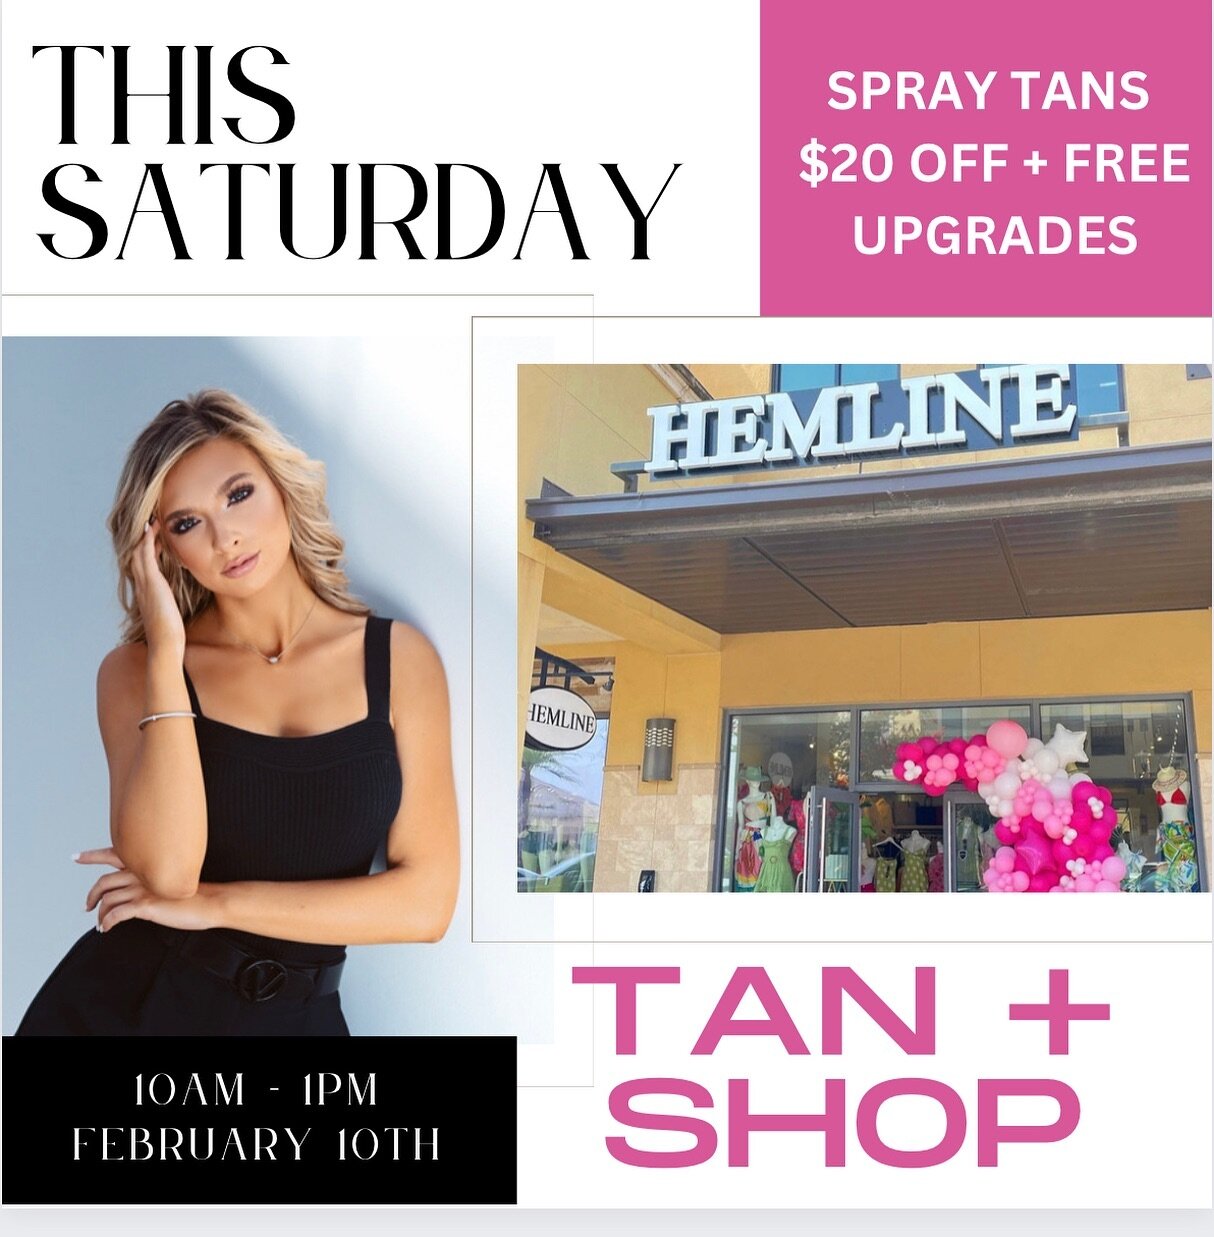 THIS SATURDAY from 10AM - 1PM I will be at @hemlinesouthwalton offering customized spray tans for $20 off + free upgrades! RESERVE YOUR APPOINTMENT by texting 850-979-5354. I would love to get you bronzed for Valentine&rsquo;s Day! 🩷
#miramarbeach #